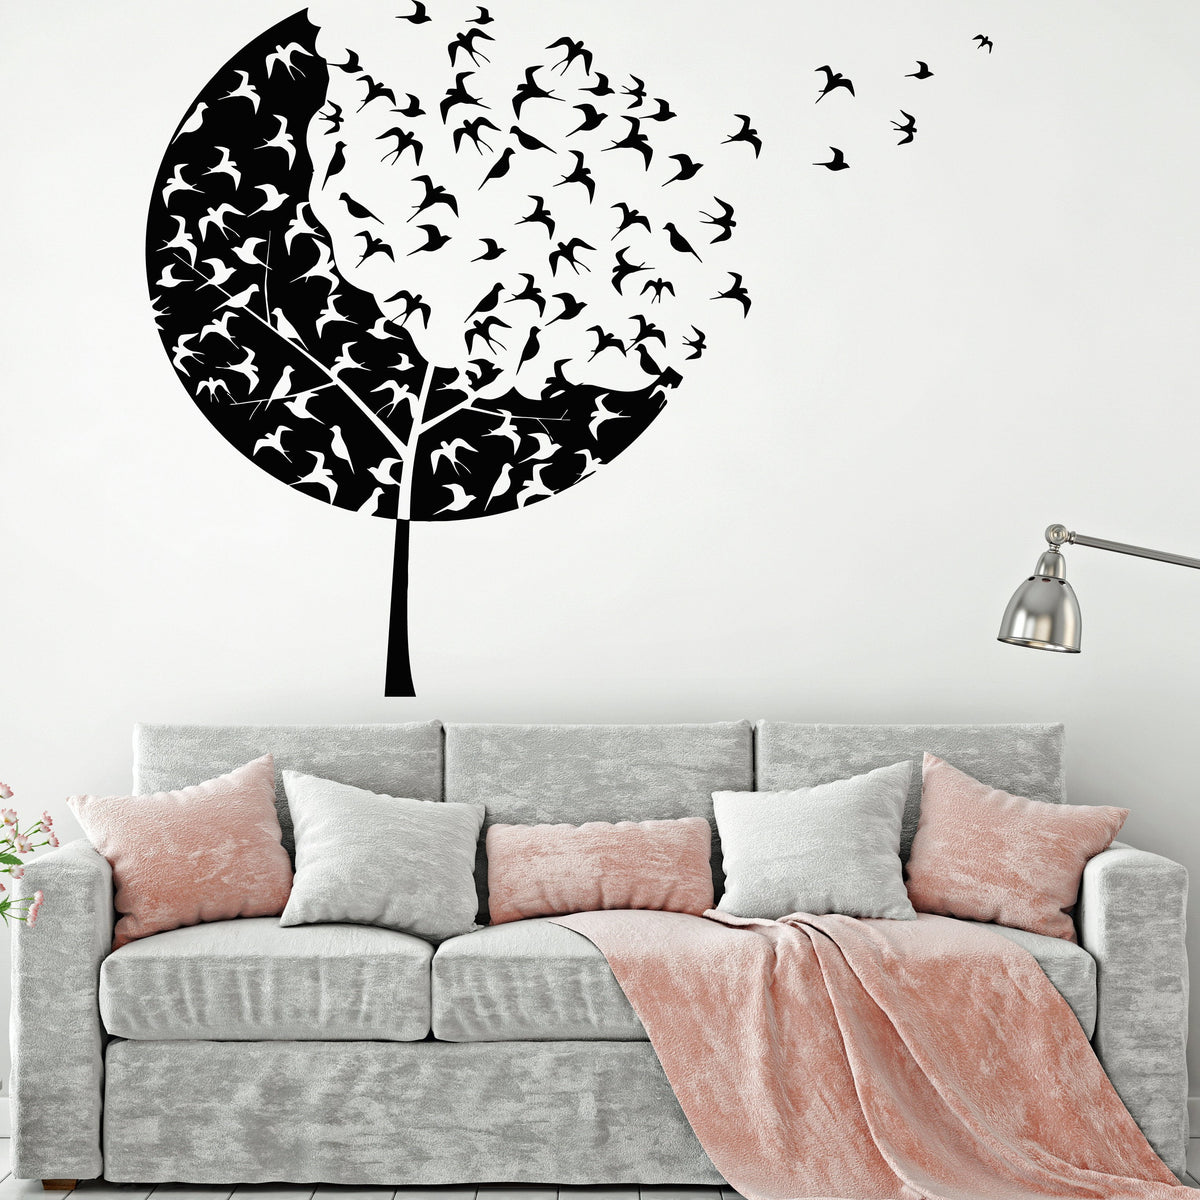 Vinyl Wall Decal Flock Of Birds Forest Tree Gothick Style Swallows Sti ...